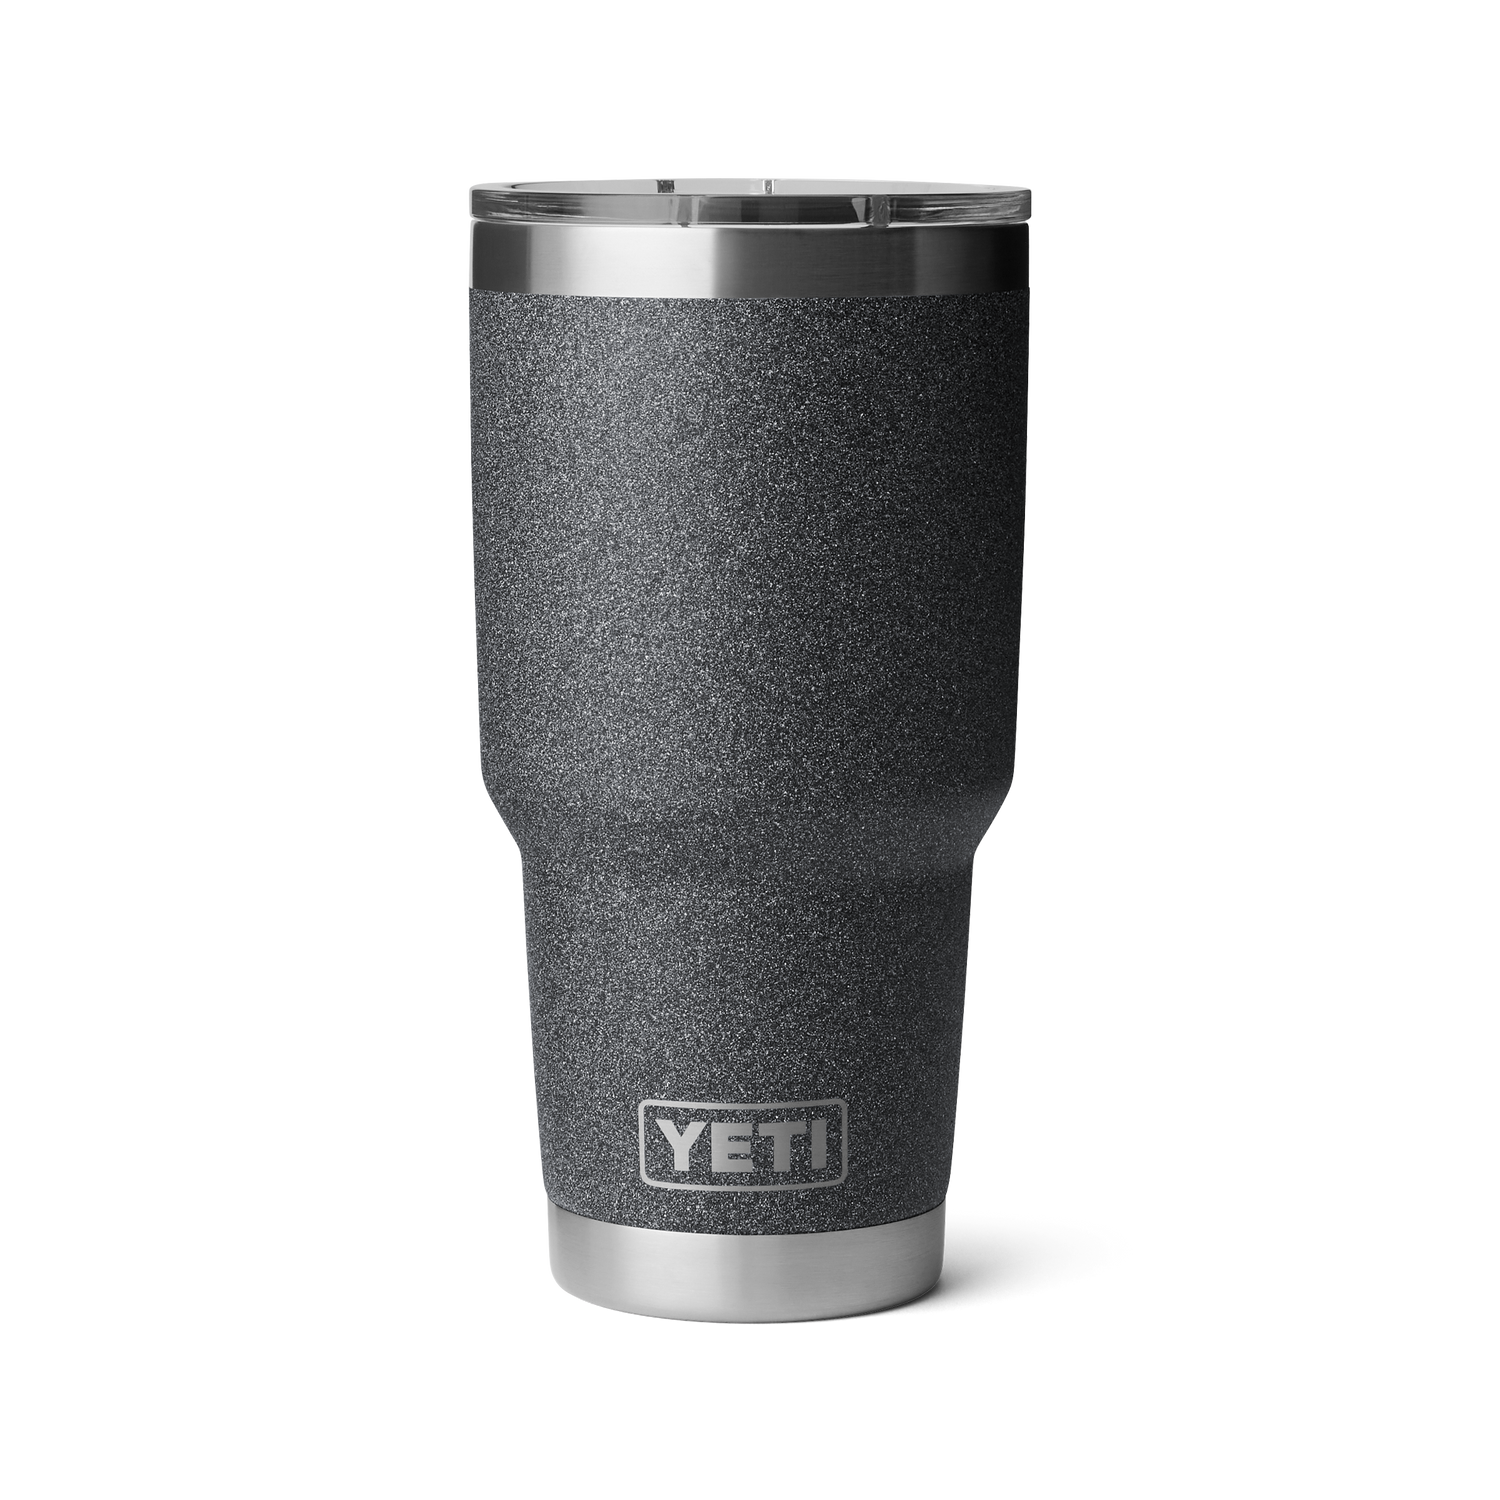 Seal Leakproof Splashproof Spill Resistant Replacement Cup Lid for YETI  30oz Tumbler Cups Accessories Barware Party Supply